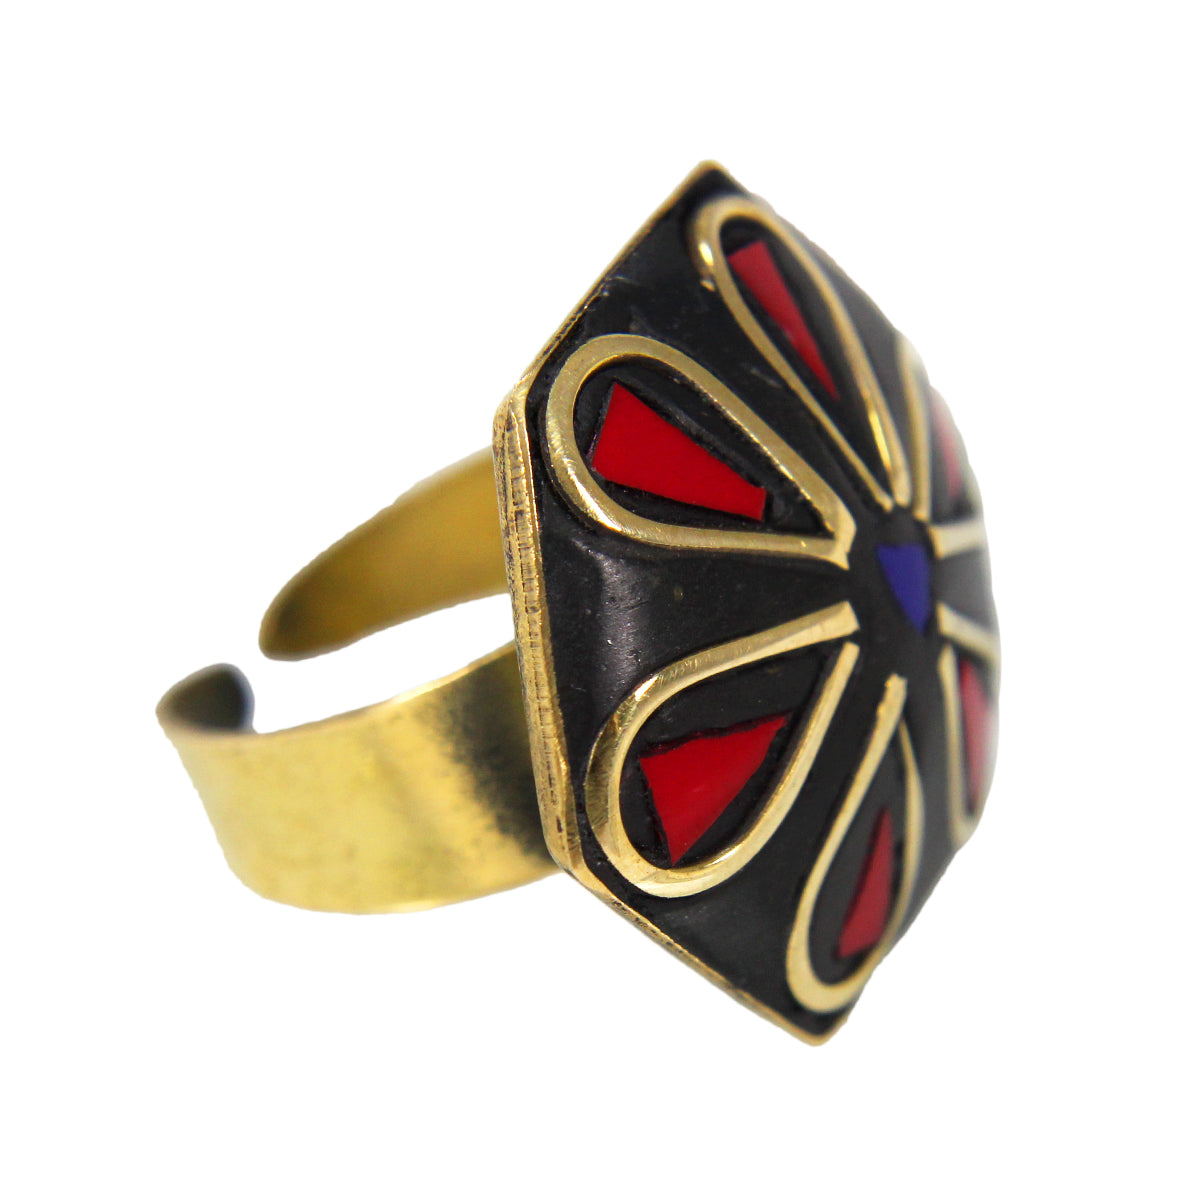  Latest Bohemian Black Golden Design Ring with Red Stone